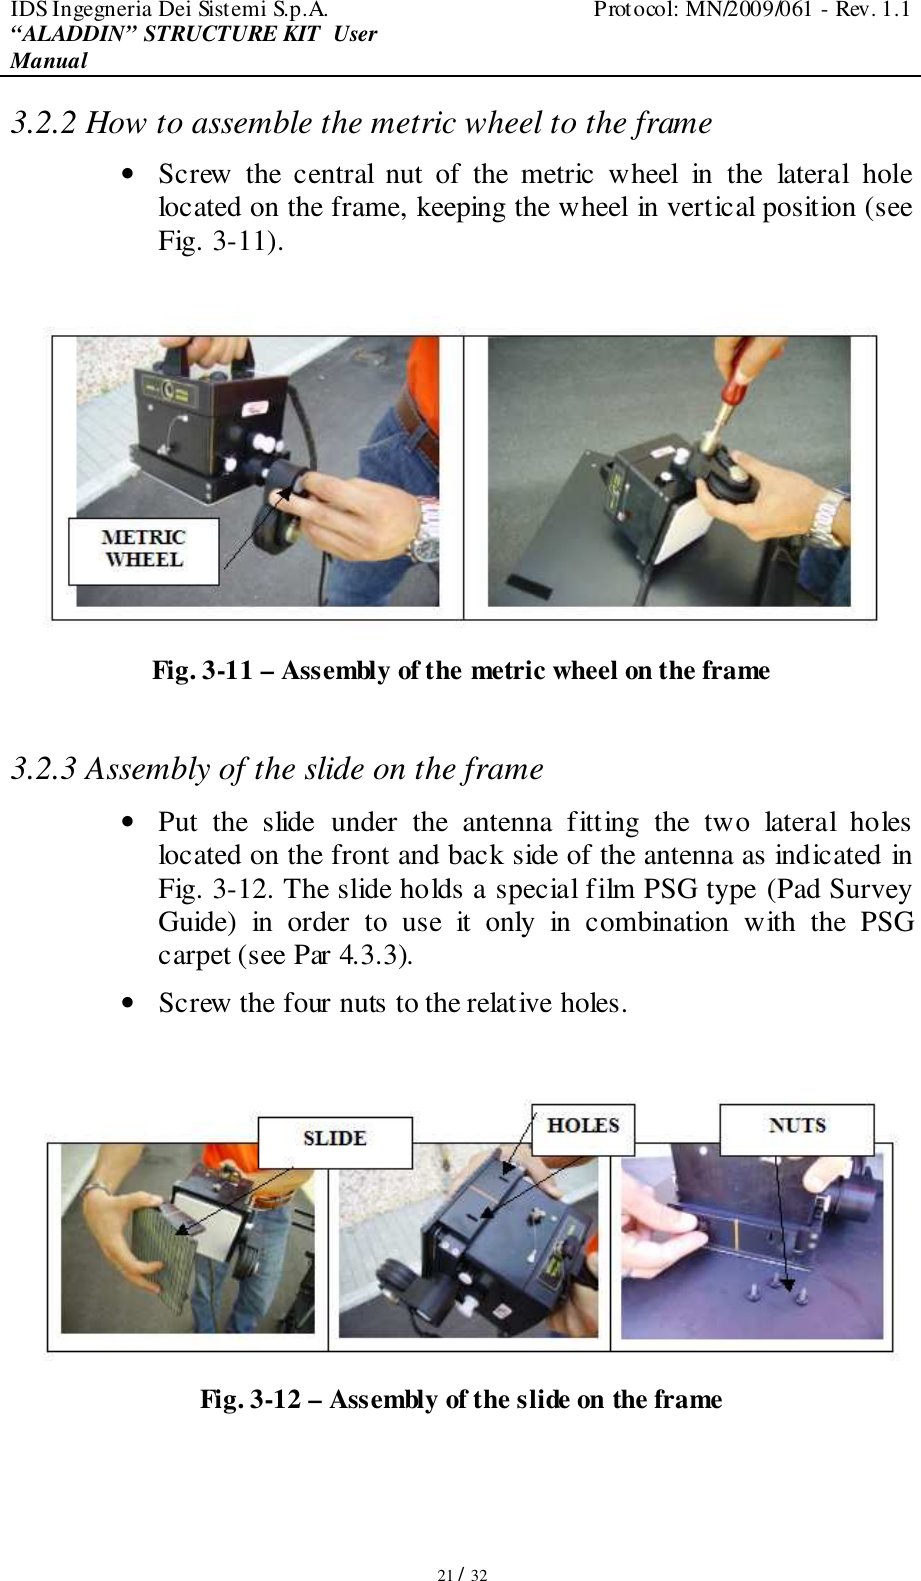 IDS Ingegneria Dei Sistemi S.p.A.  Protocol: MN/2009/061 - Rev. 1.1 “ALADDIN” STRUCTURE KIT  User Manual   21 / 32 3.2.2 How to assemble the metric wheel to the frame • Screw  the  central  nut  of  the  metric  wheel  in  the  lateral  hole located on the frame, keeping the wheel in vertical position (see Fig. 3-11).   Fig. 3-11 – Assembly of the metric wheel on the frame  3.2.3 Assembly of the slide on the frame • Put  the  slide  under  the  antenna  fitting  the  two  lateral  holes located on the front and back side of the antenna as indicated in Fig. 3-12. The slide holds a special film PSG type (Pad Survey Guide)  in  order  to  use  it  only  in  combination  with  the  PSG carpet (see Par 4.3.3). • Screw the four nuts to the relative holes.   Fig. 3-12 – Assembly of the slide on the frame   